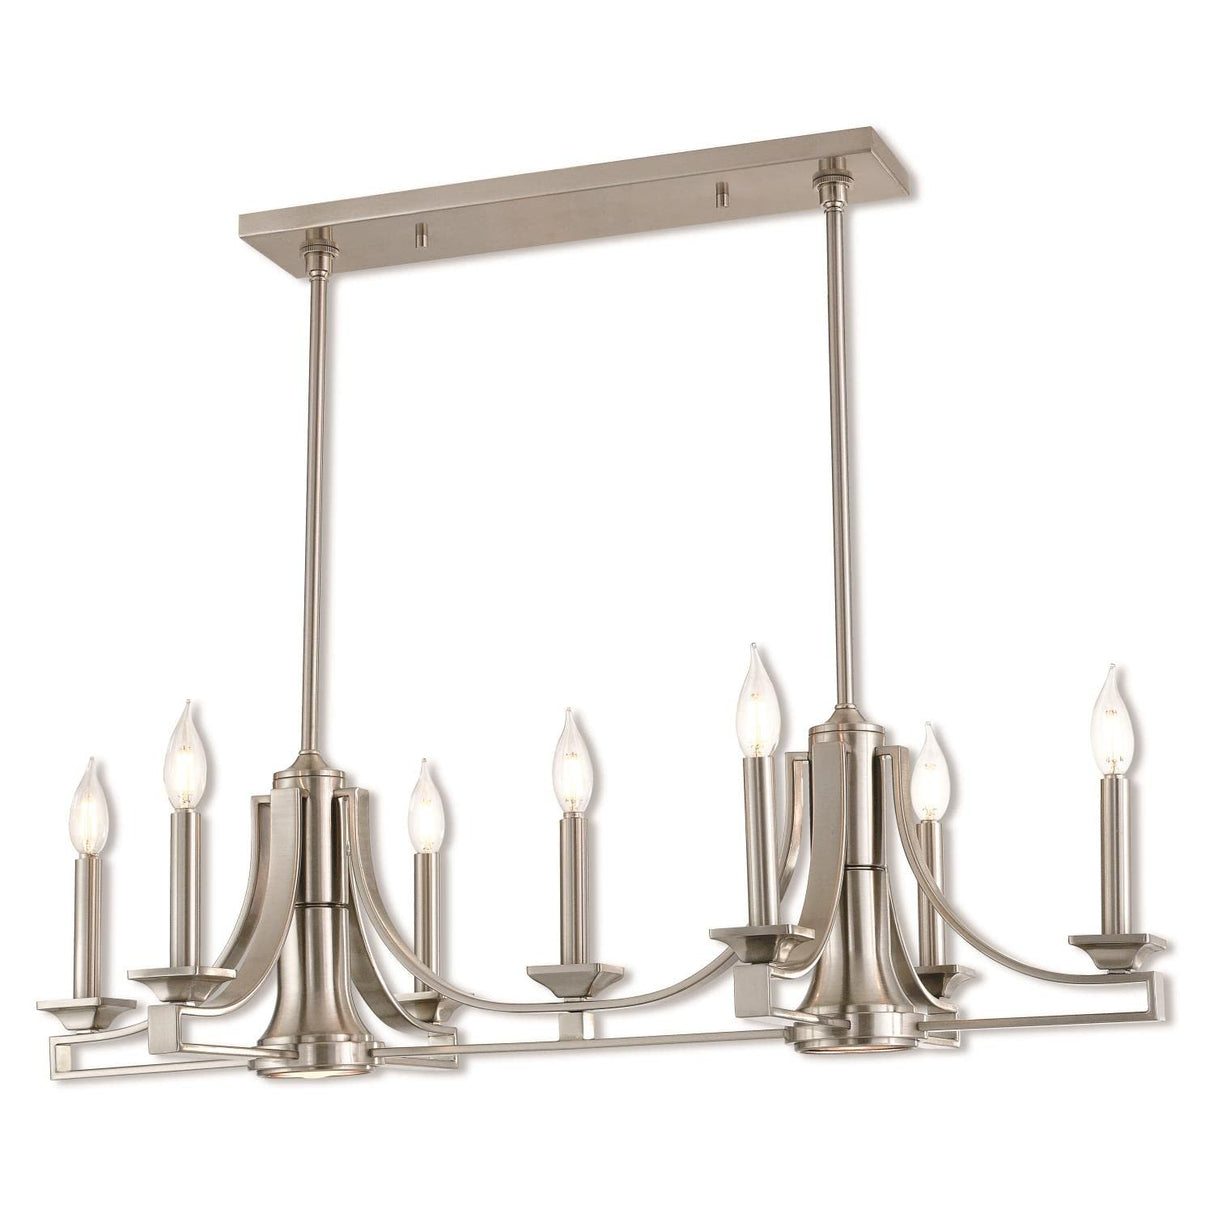 Livex Lighting 40057-91 Transitional Nine Light Linear Chandelier from Trumbull Collection in Pwt, Nckl, B/S, Slvr. Finish, 36.00 inches, 48.50x36.00x18.25, Brushed Nickel